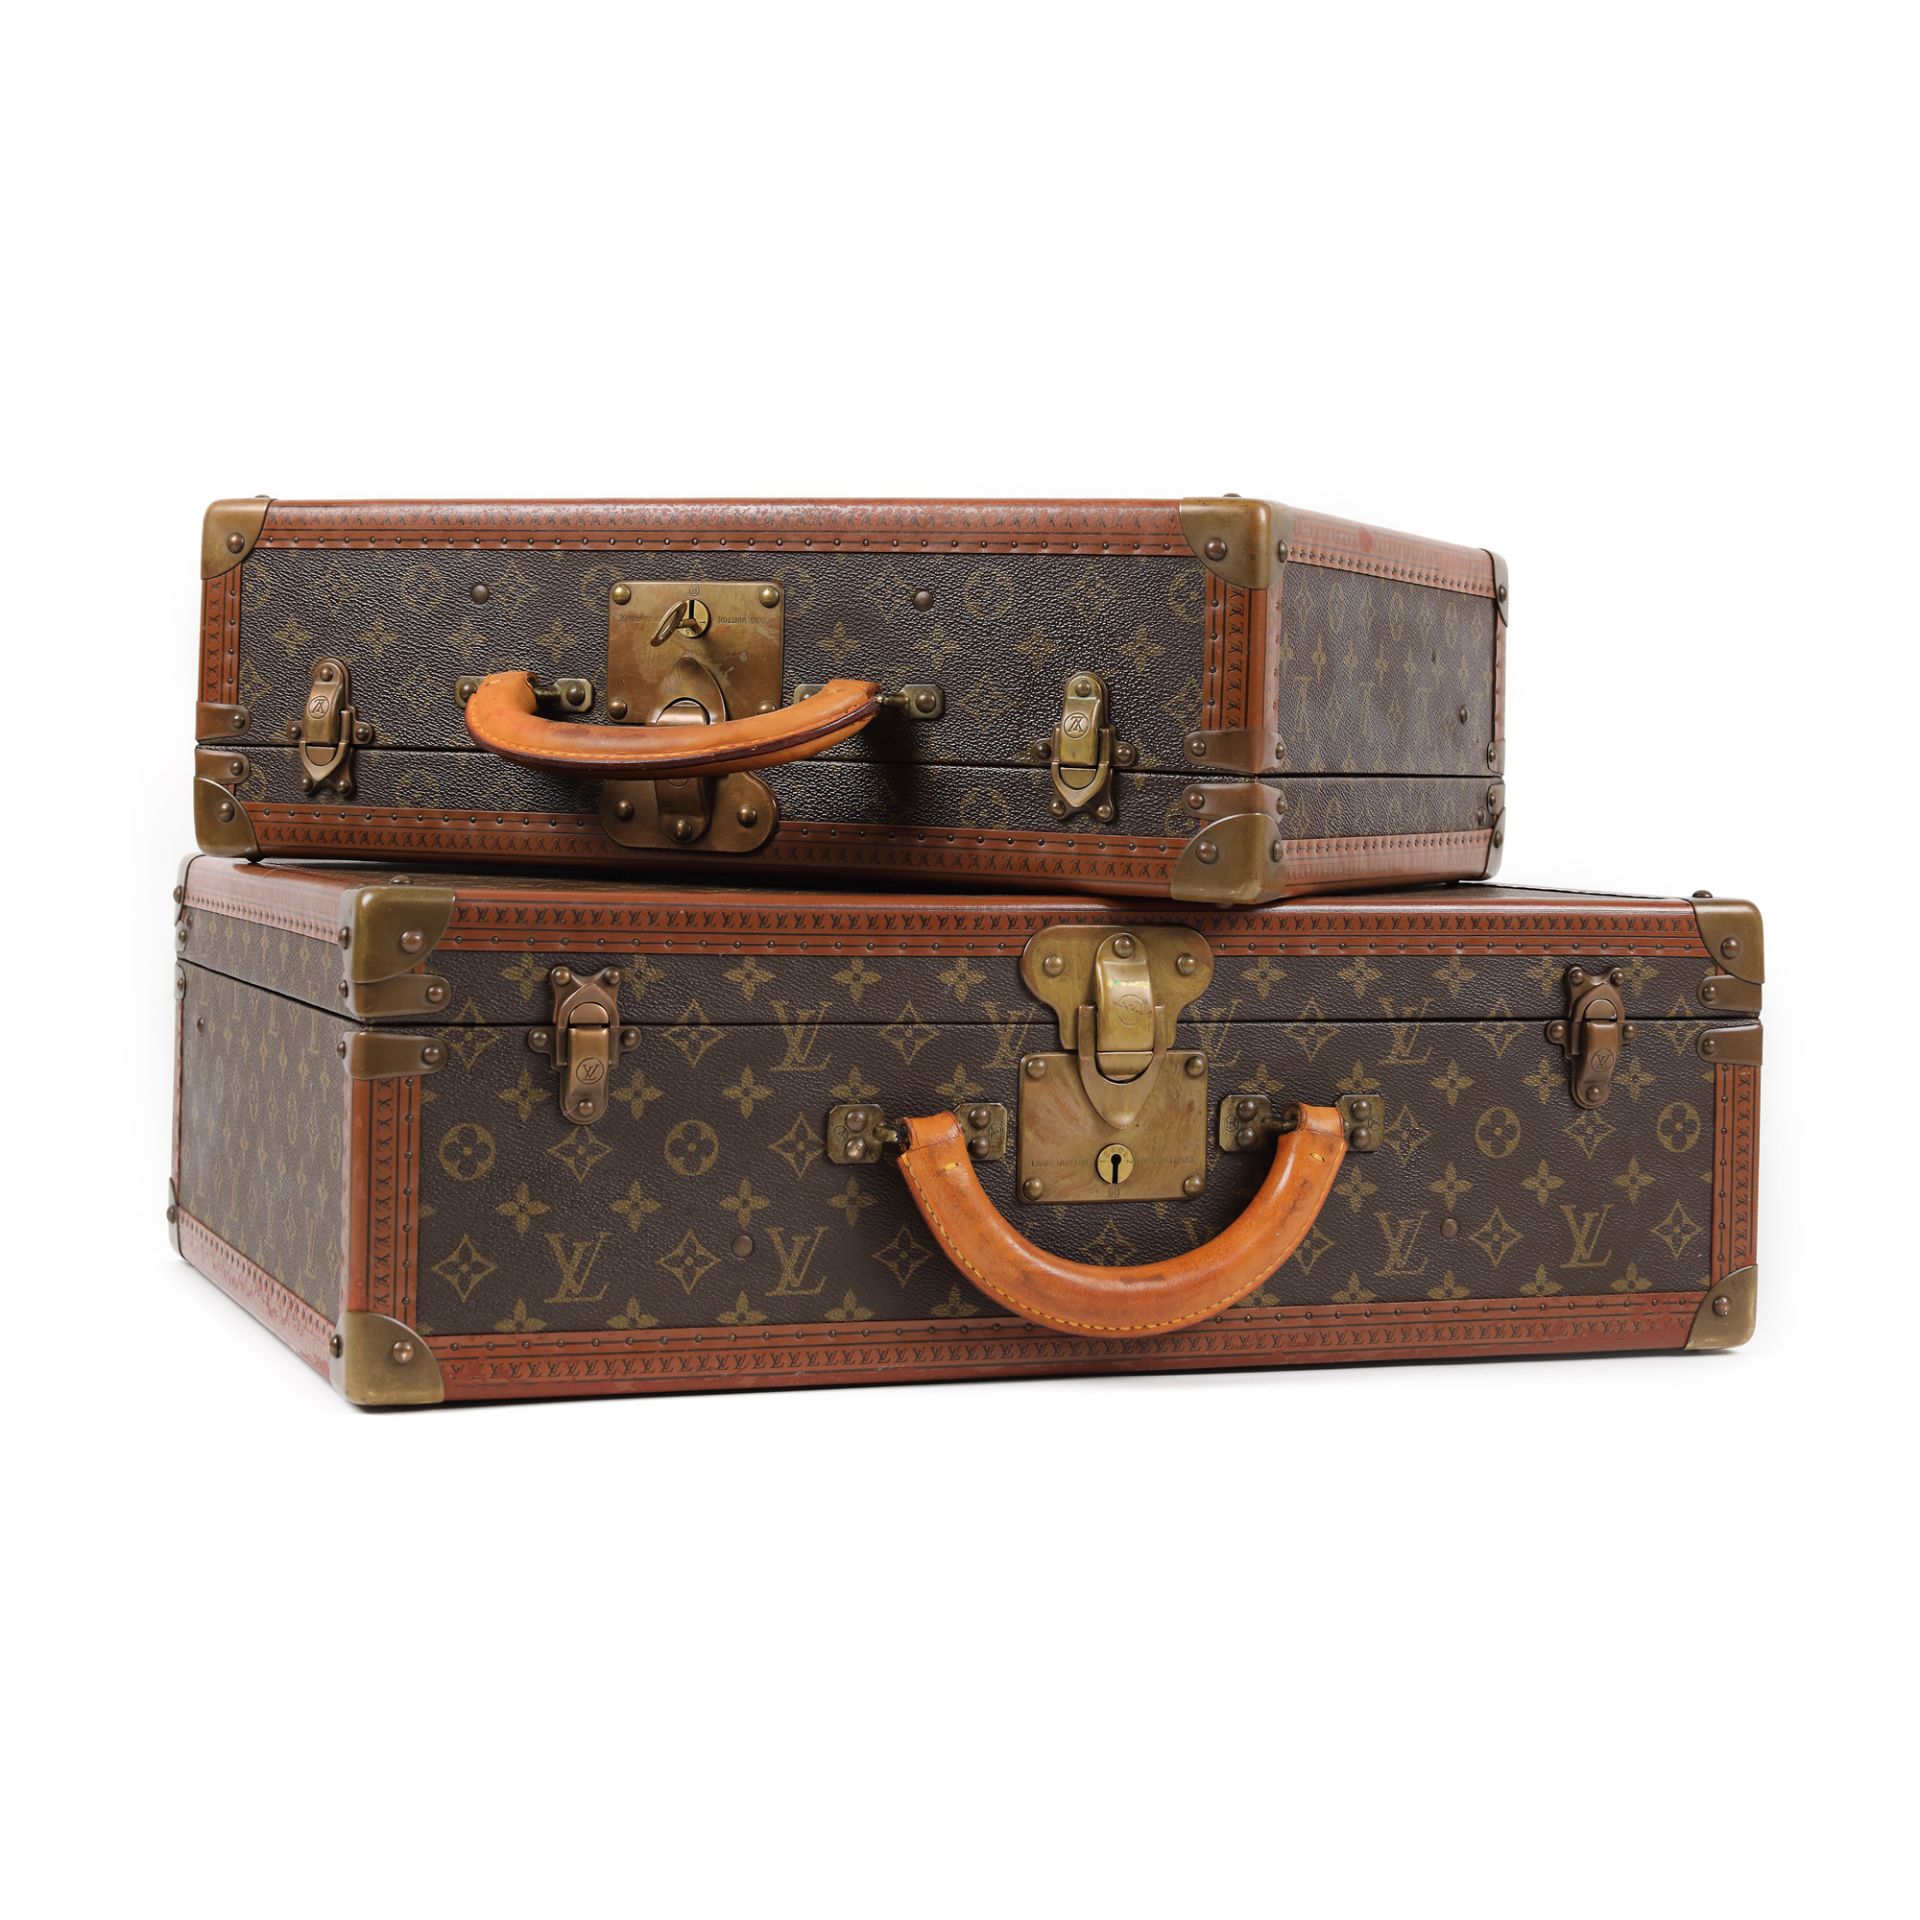 Pair of Louis Vuitton suitcases for travel